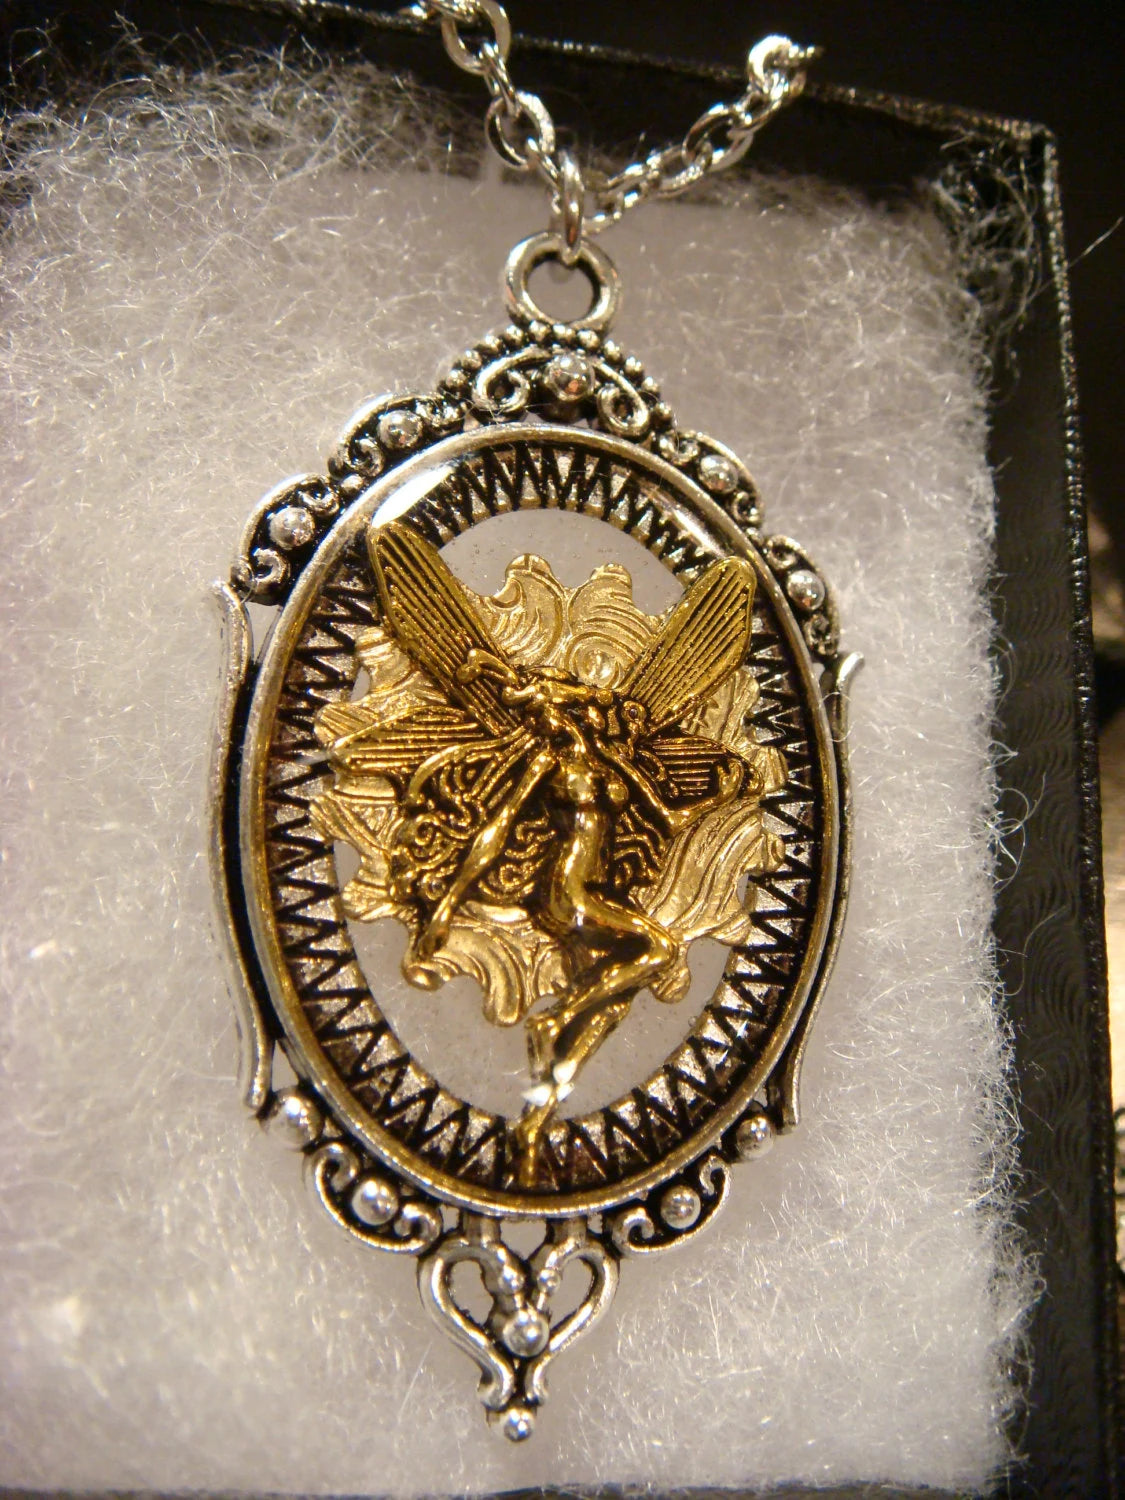 Fairy with Gear in See-thru Ornate Necklace